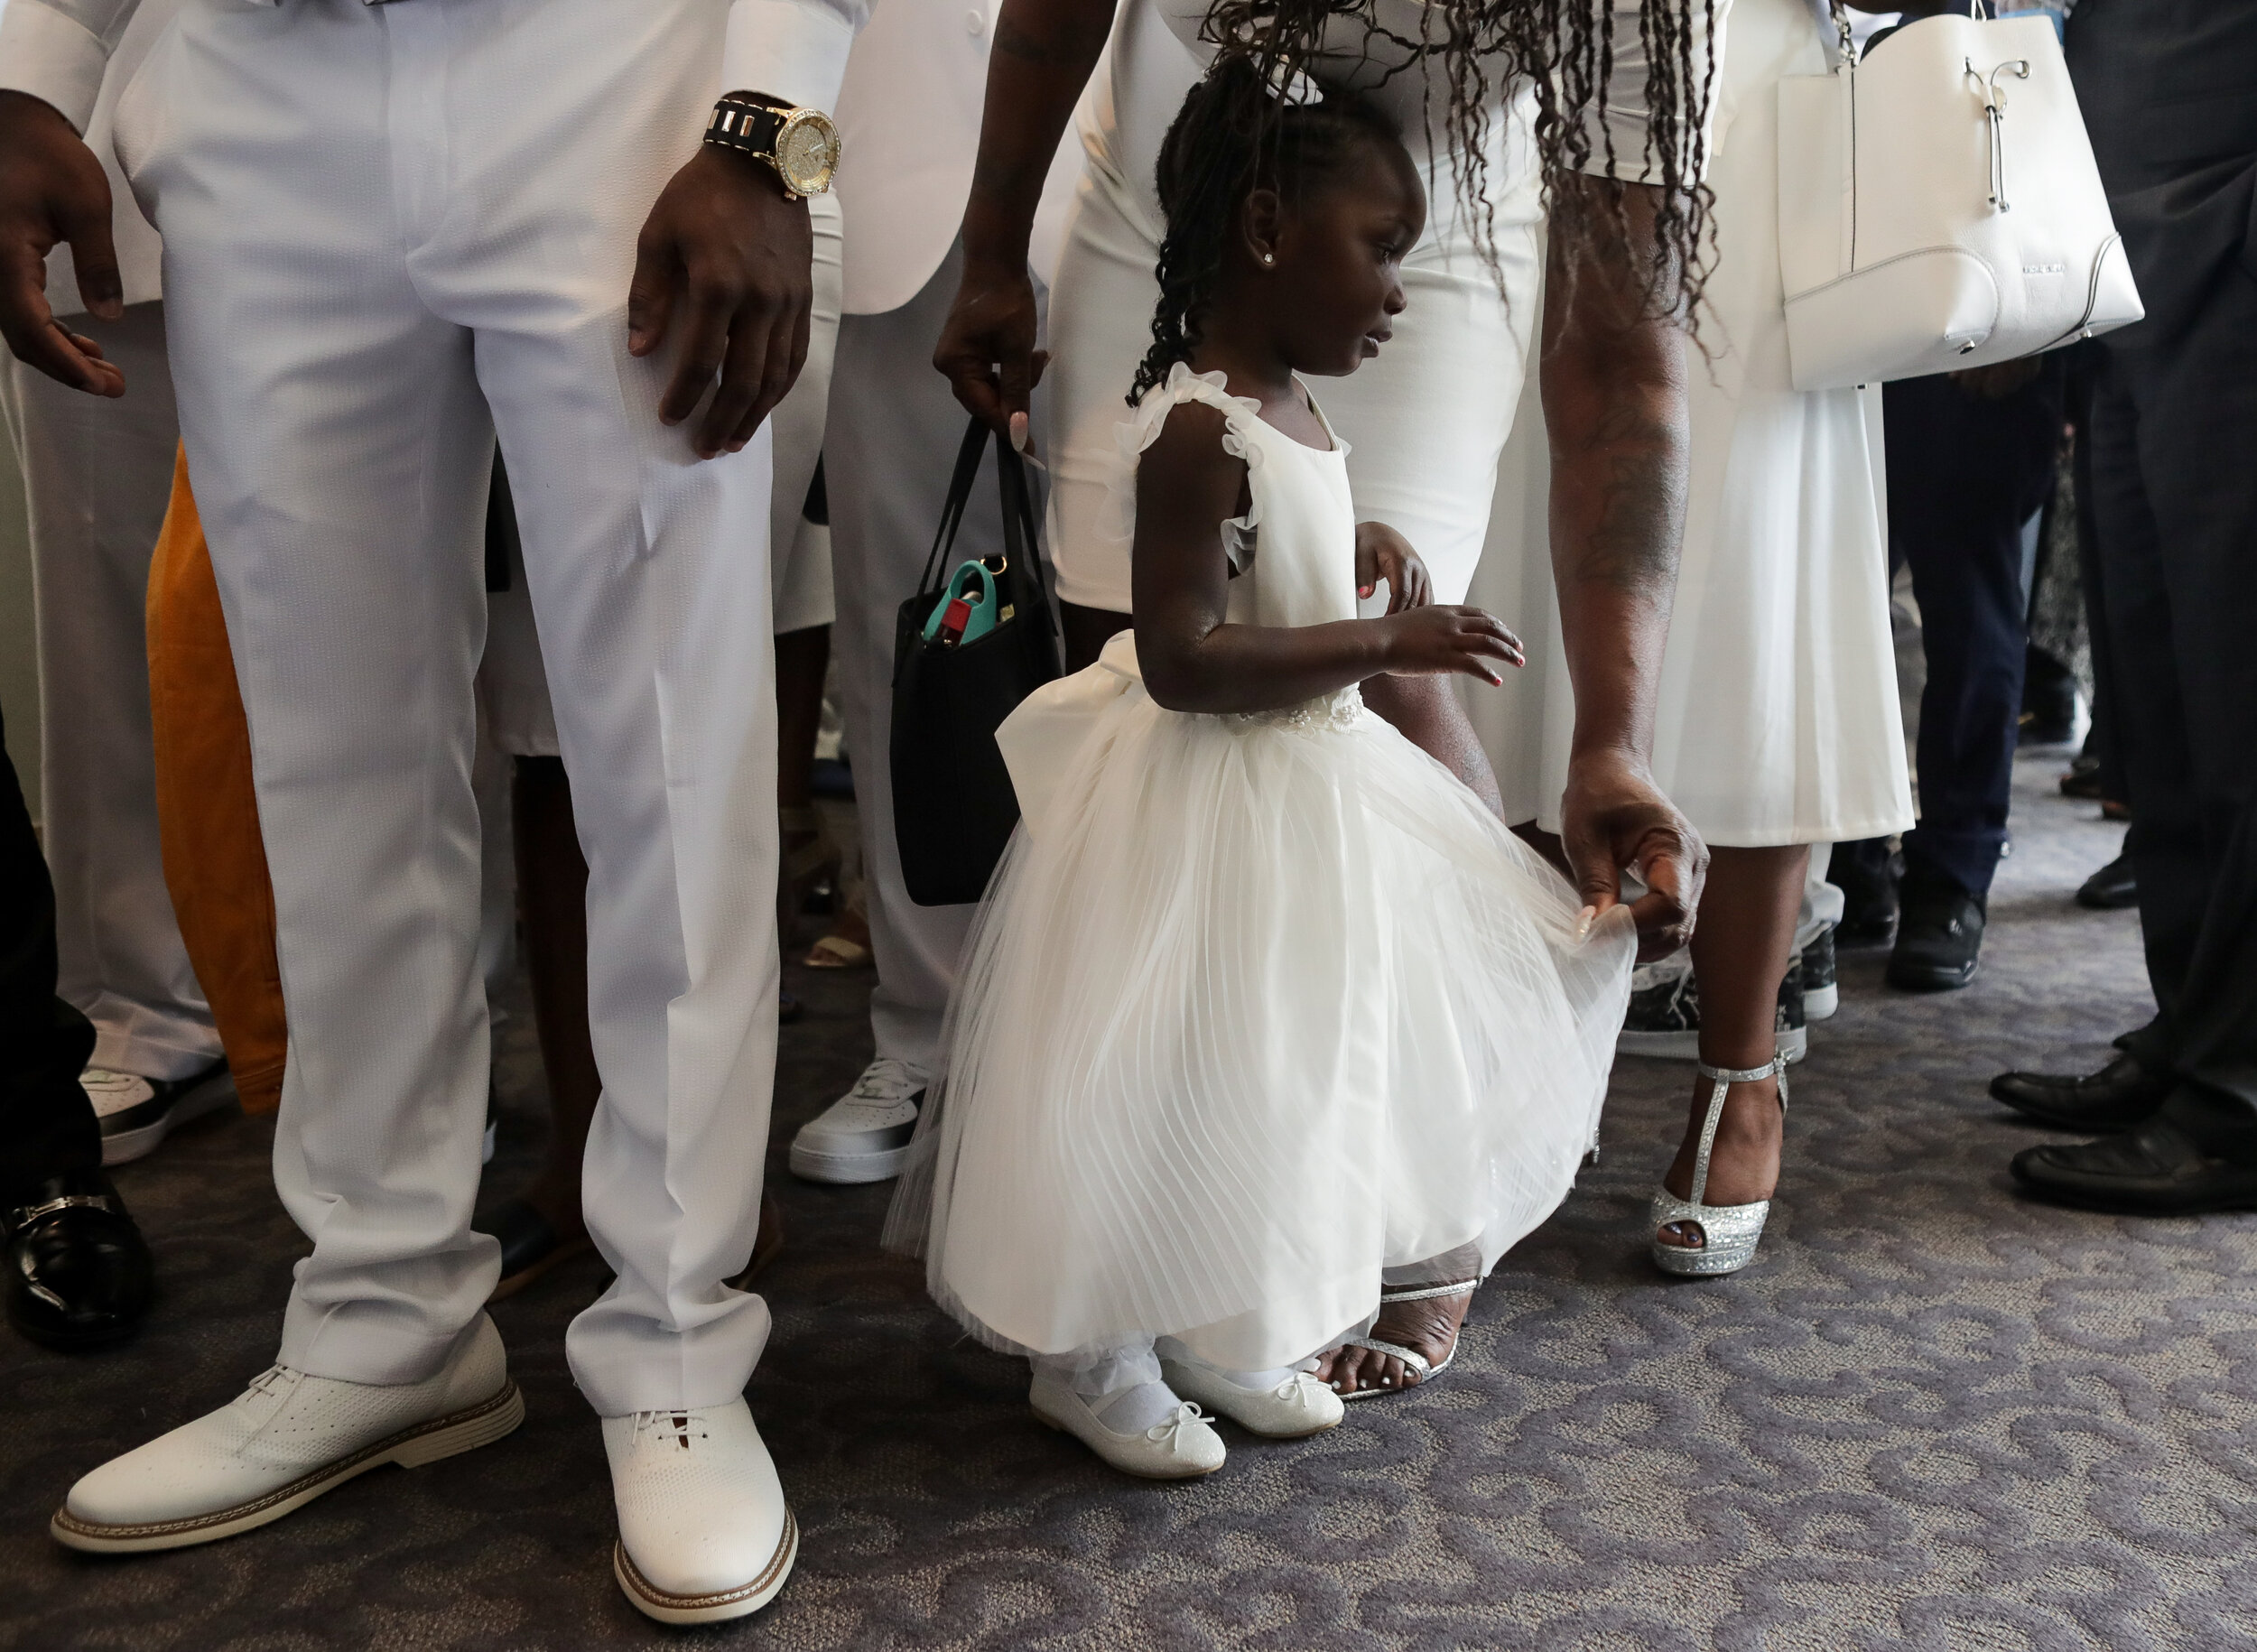  The family of George Floyd prepares to enter the The Fountain of Praise church for Floyd’s funeral on Tuesday, June 9, 2020, in Houston, Texas. Floyd died while in custody of the Minneapolis Police Department, after officer Derek Chauvin knelt on hi